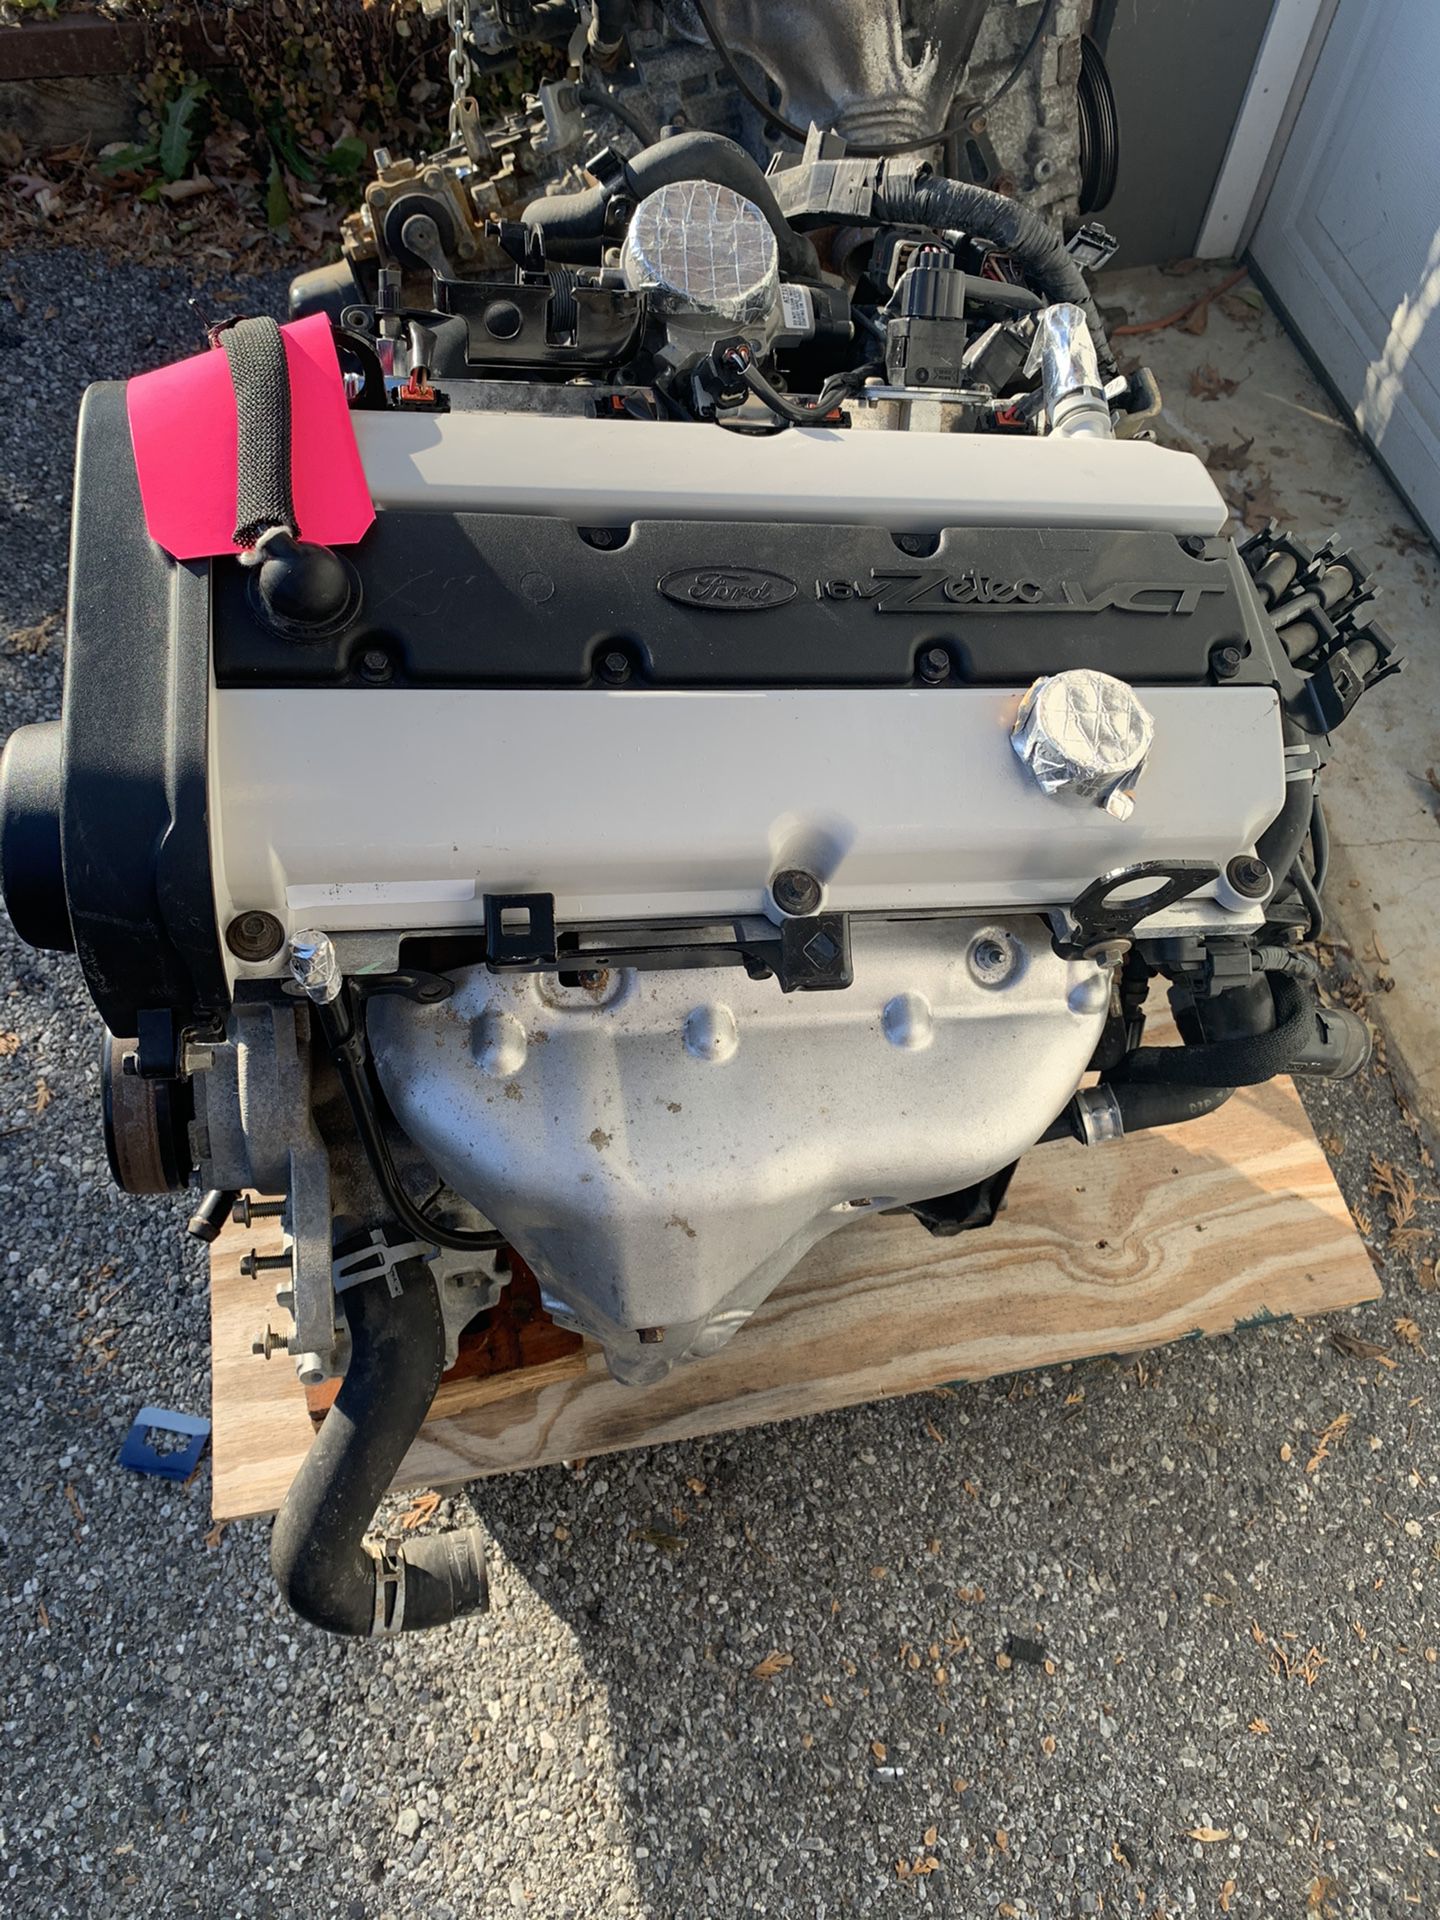 1998 Ford Escort ZX2 Engine with 32k miles